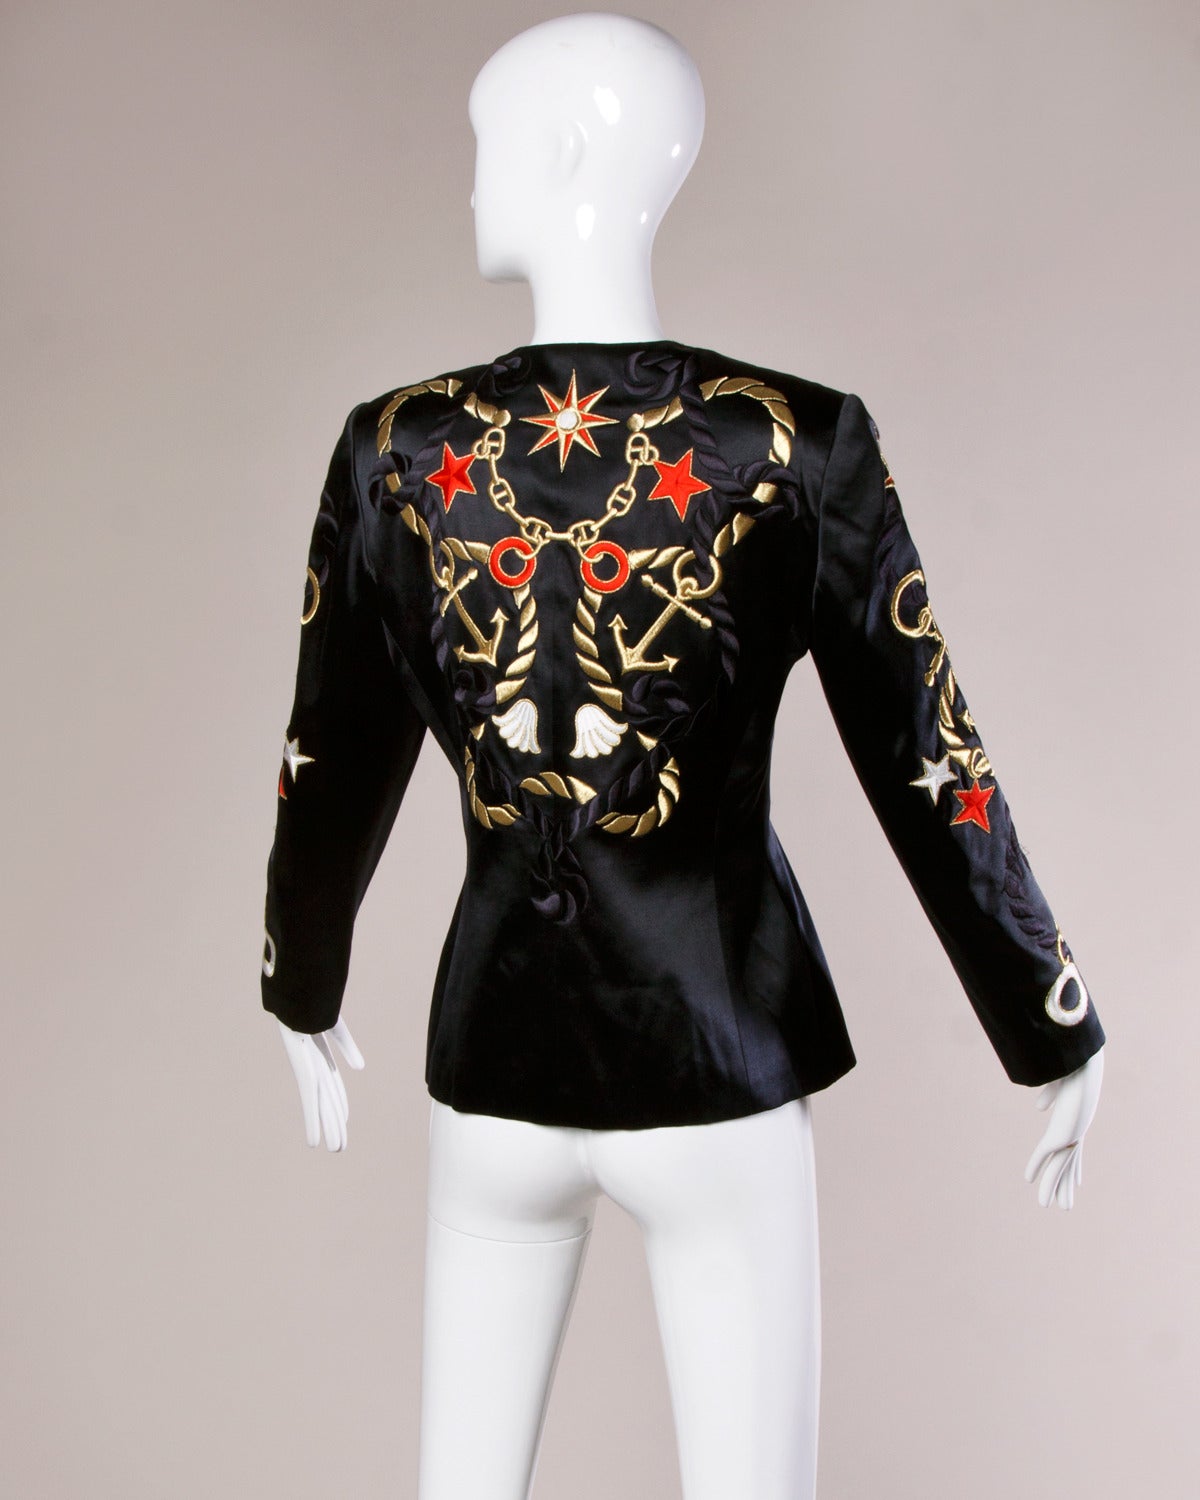 Vintage Escada blazer with Nautical-inspired novelty embroidery. 

Details:

Fully Lined
Structured Shoulder Pads Are Sewn Into Lining
Front Button Closure
Marked Size: 36
Color: Black Iridescent/ White Iridescent/ Red/ Gold